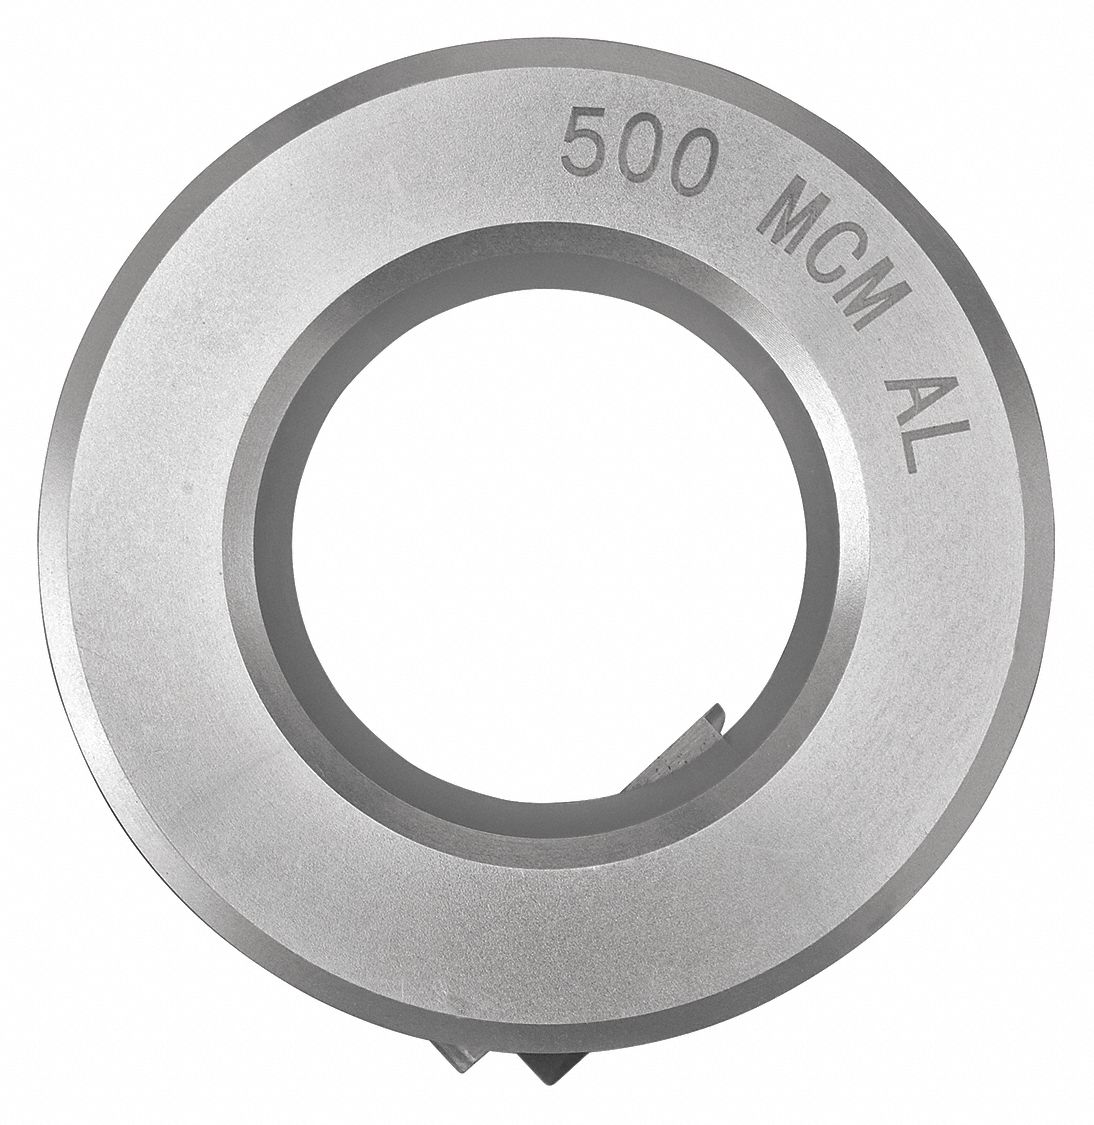 500 MCM AL Stripping Bushing with 70 mil Jacket MIL Thickness and 0.901 in  Max. Bushing I.D.